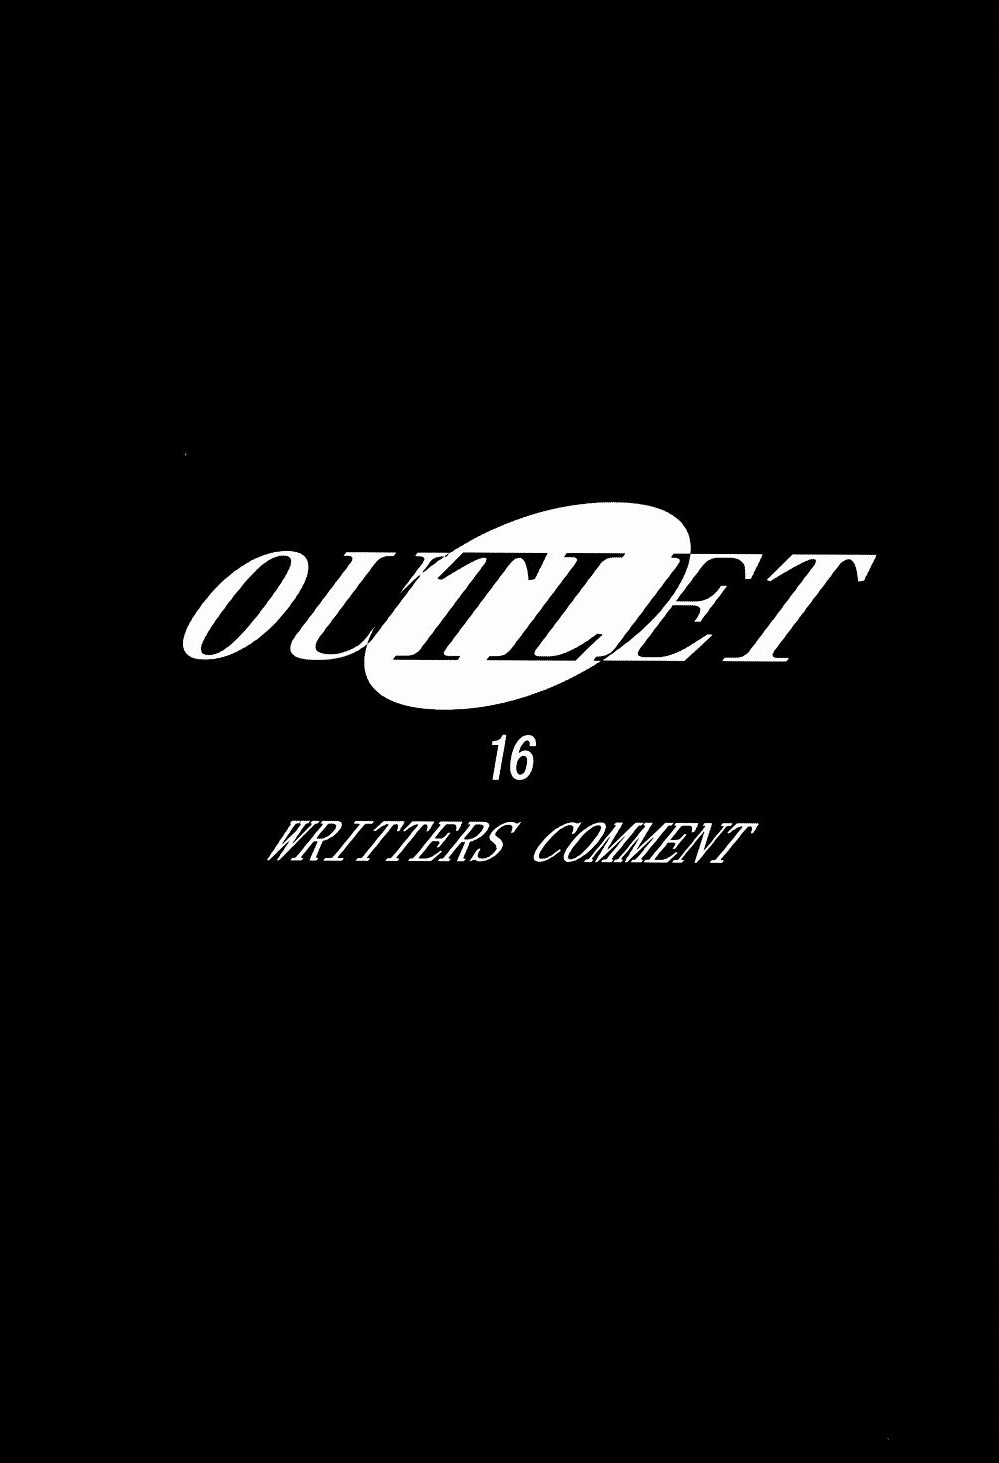 [ST DIFFERENT] Outlet 16 (Uchuu No Stellvia) [ST DIFFERENT] Outlet 16 (宇宙のステルヴィア)